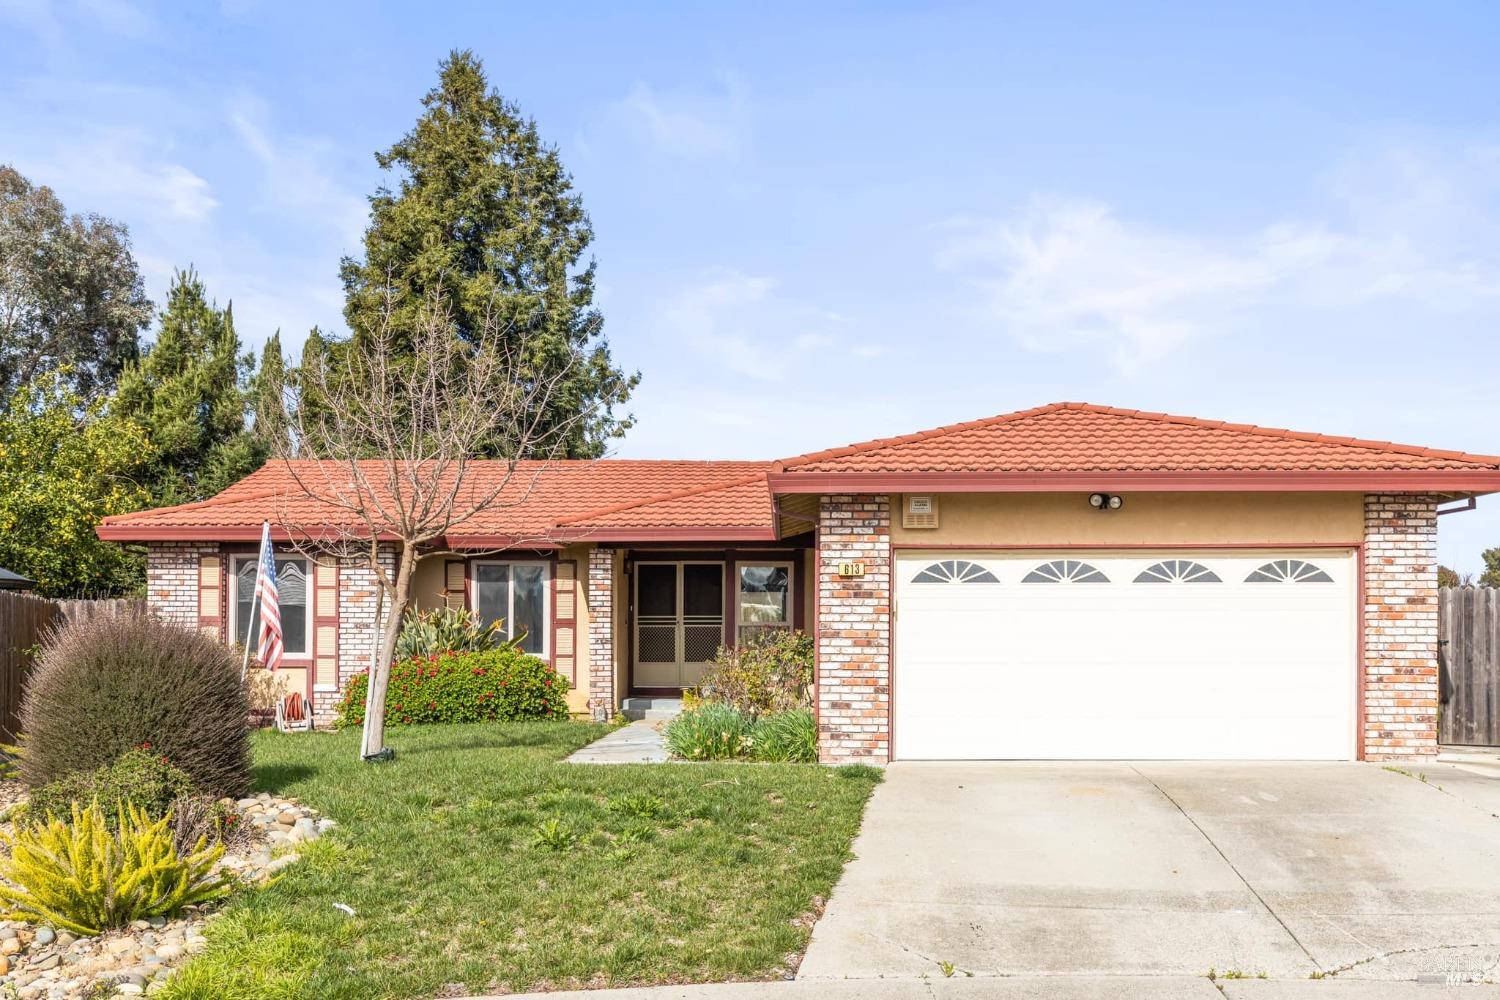 Photo of 613 Kingswood Ct in Fairfield, CA